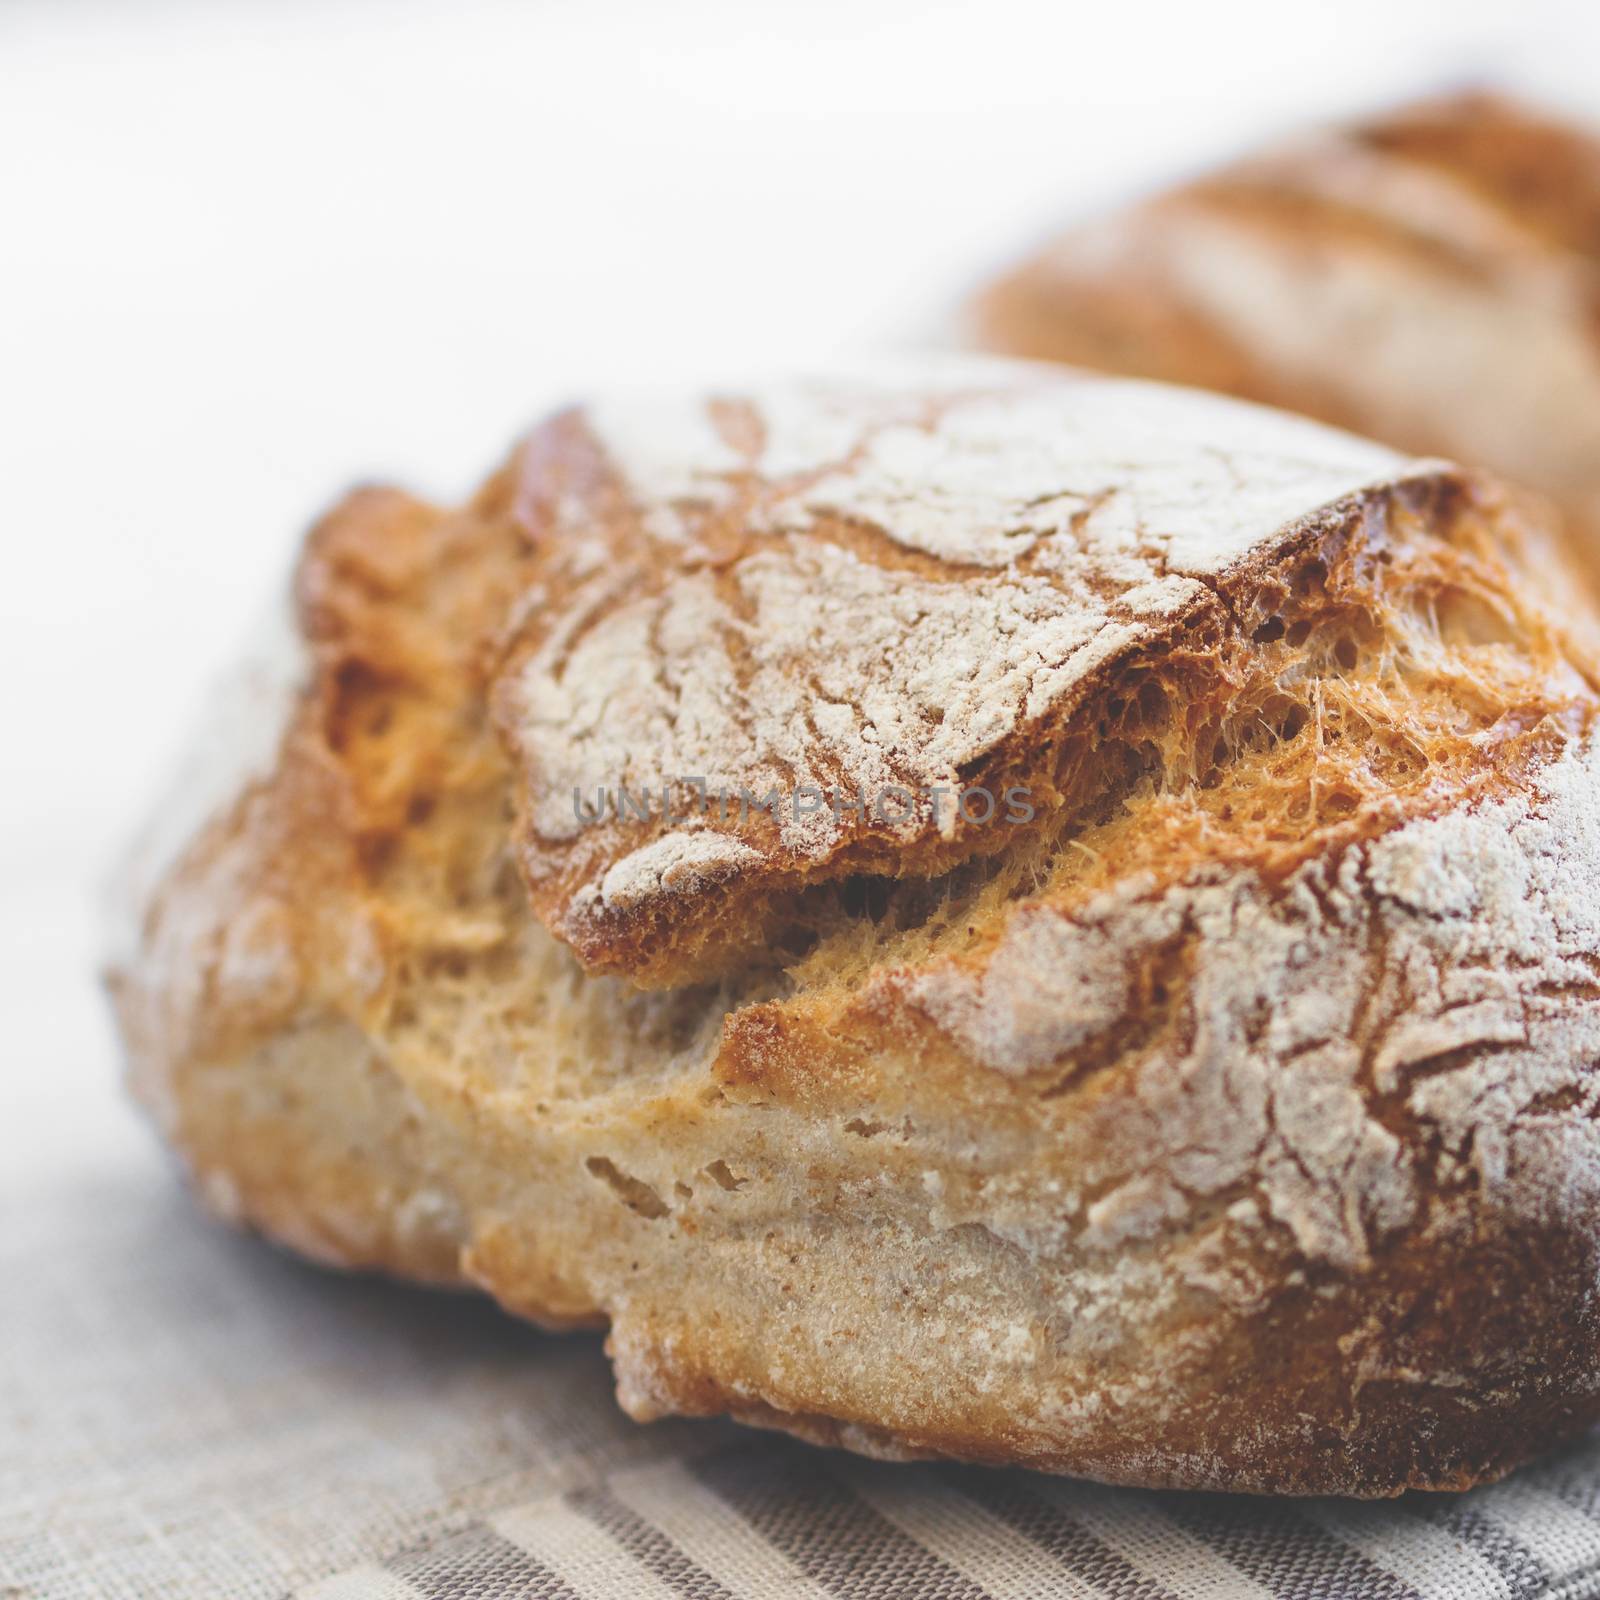 Tasty loaf of bread on table cloth. Extreme close-up of rustic Italian bread. Shallow DOF.